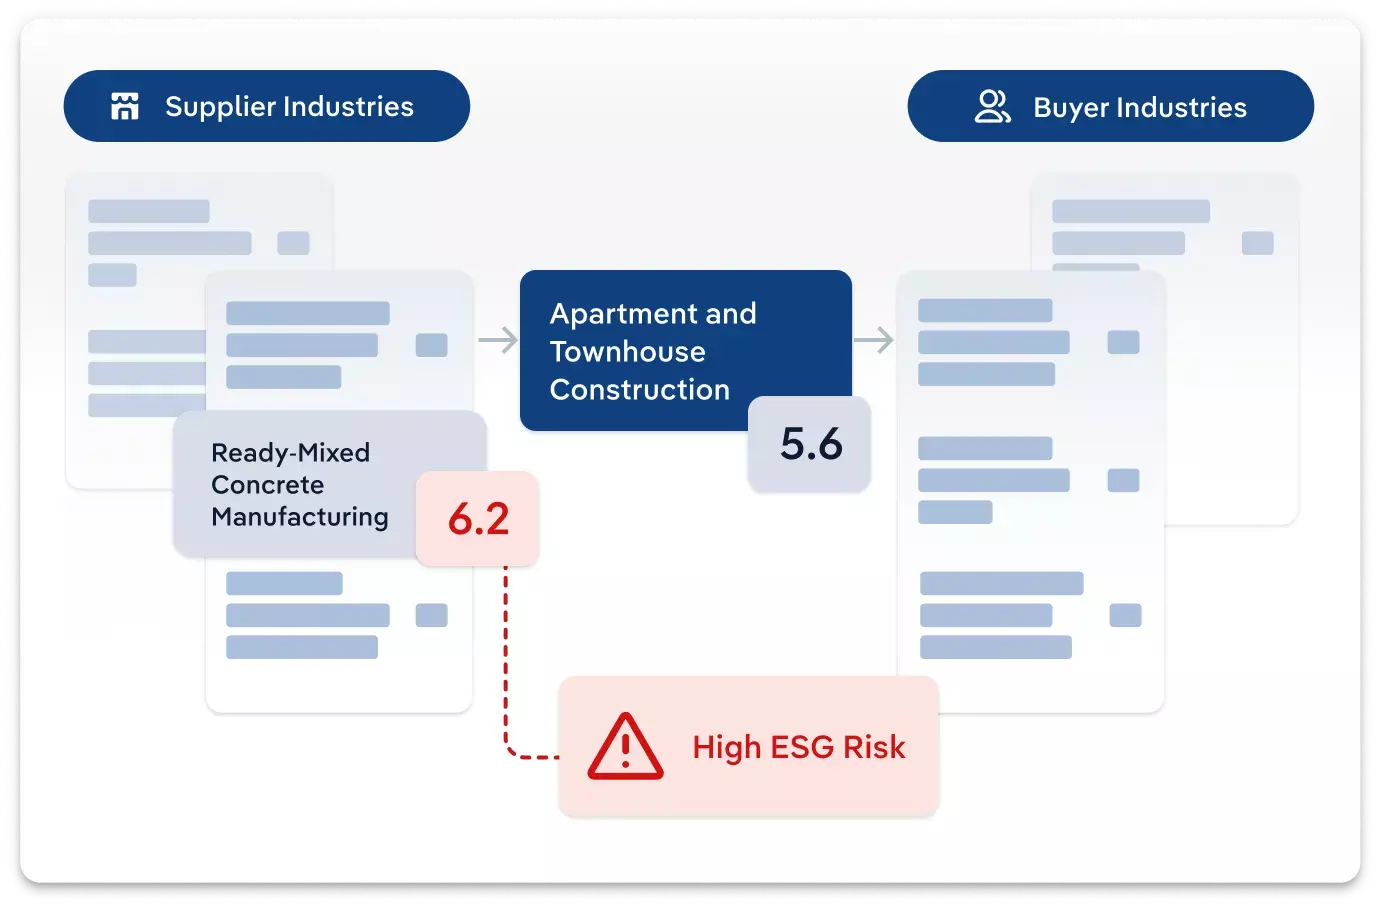 ESG risk scores for specific construction industries diagram the supply chain sustainability of real estate development.